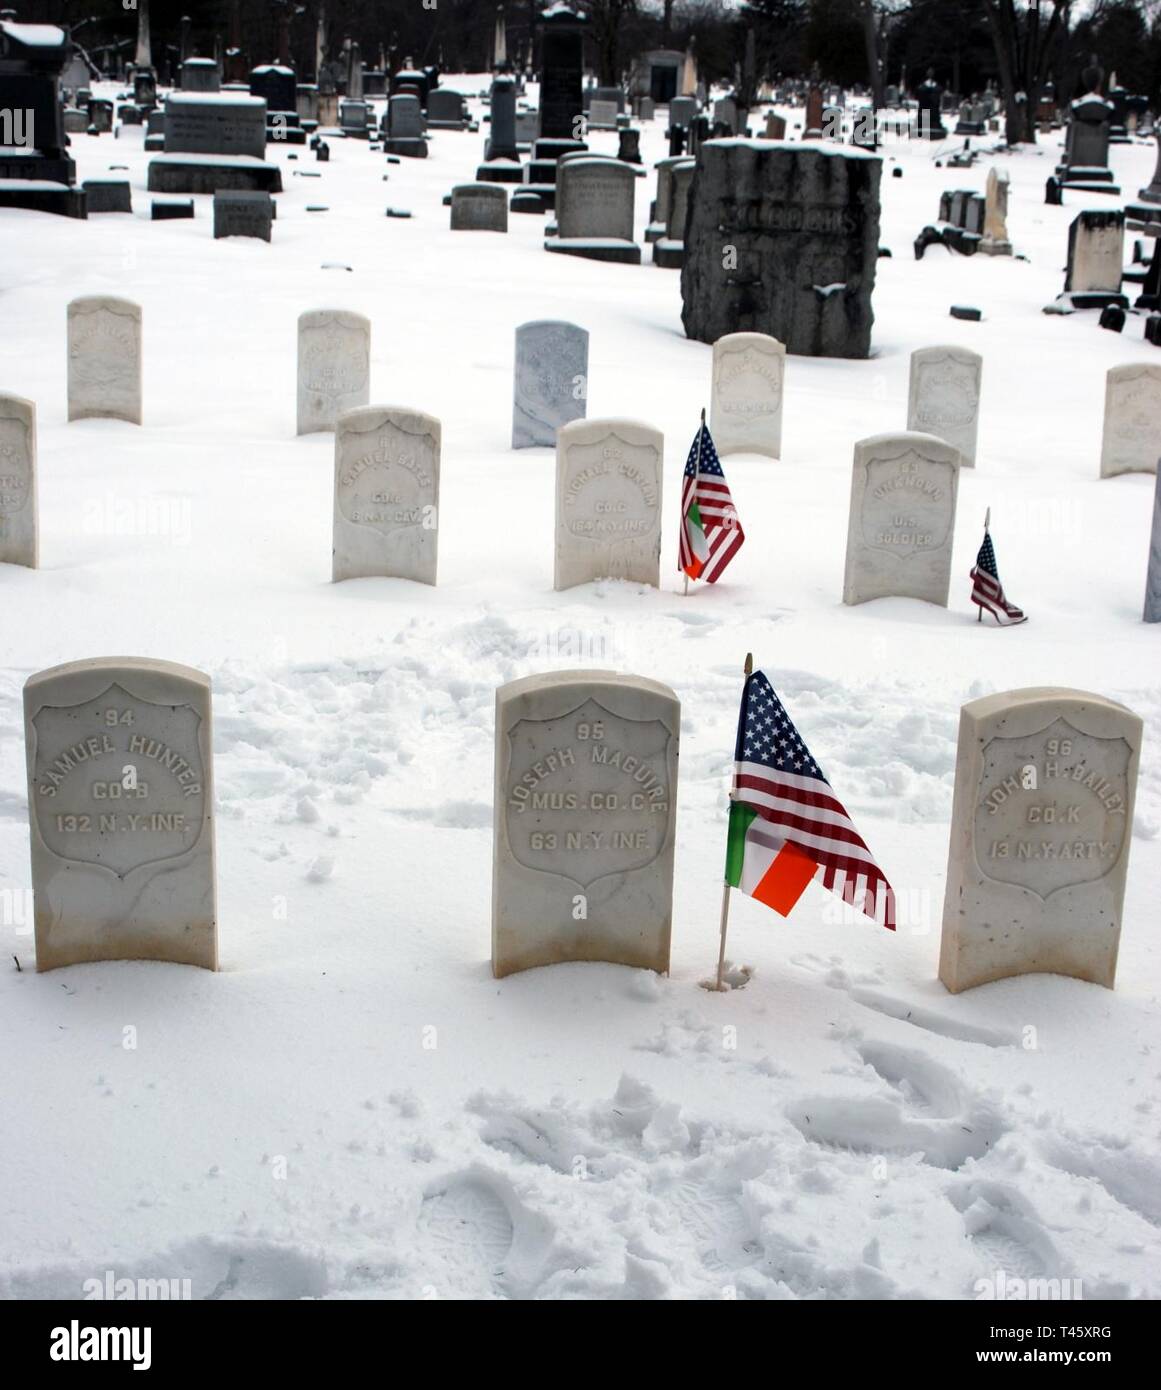 American and Irish flags mark the graves of Civil War veterans who served in the Irish Brigade at the Soldiers Lot in Albany Rural Cemetery on March 10, 2019. Veterans of the New York National Guard's 1st  Battalion 69th Infantry who live in the Albany, N.Y.- area marked the graves of Irish-American Civil War Soldiers at Albany Rural Cemetery and St. Agnes Catholic Cemetery to acknowledge the link between their service and the 69th Infantry, which was historically an Irish-American unit and part of the Irish Brigade during the war. ( U.S. Army National Guard Stock Photo